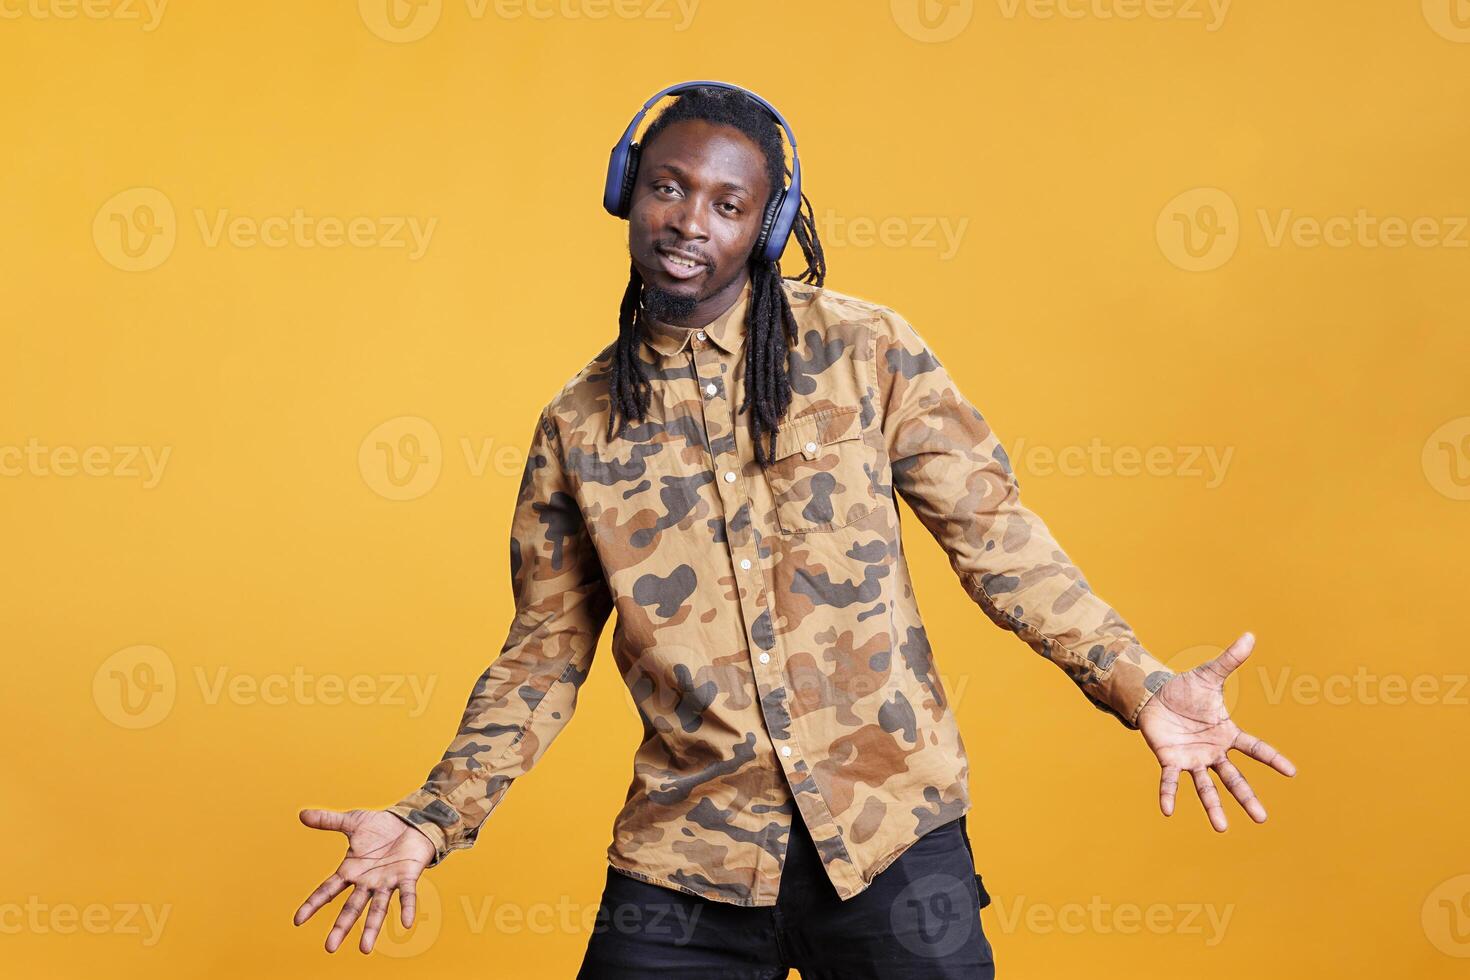 African american man wearing headphones enjoying music playlist having fun in studio over yellow background. Playful young adult listening radio song and dancing, enjoying free time photo